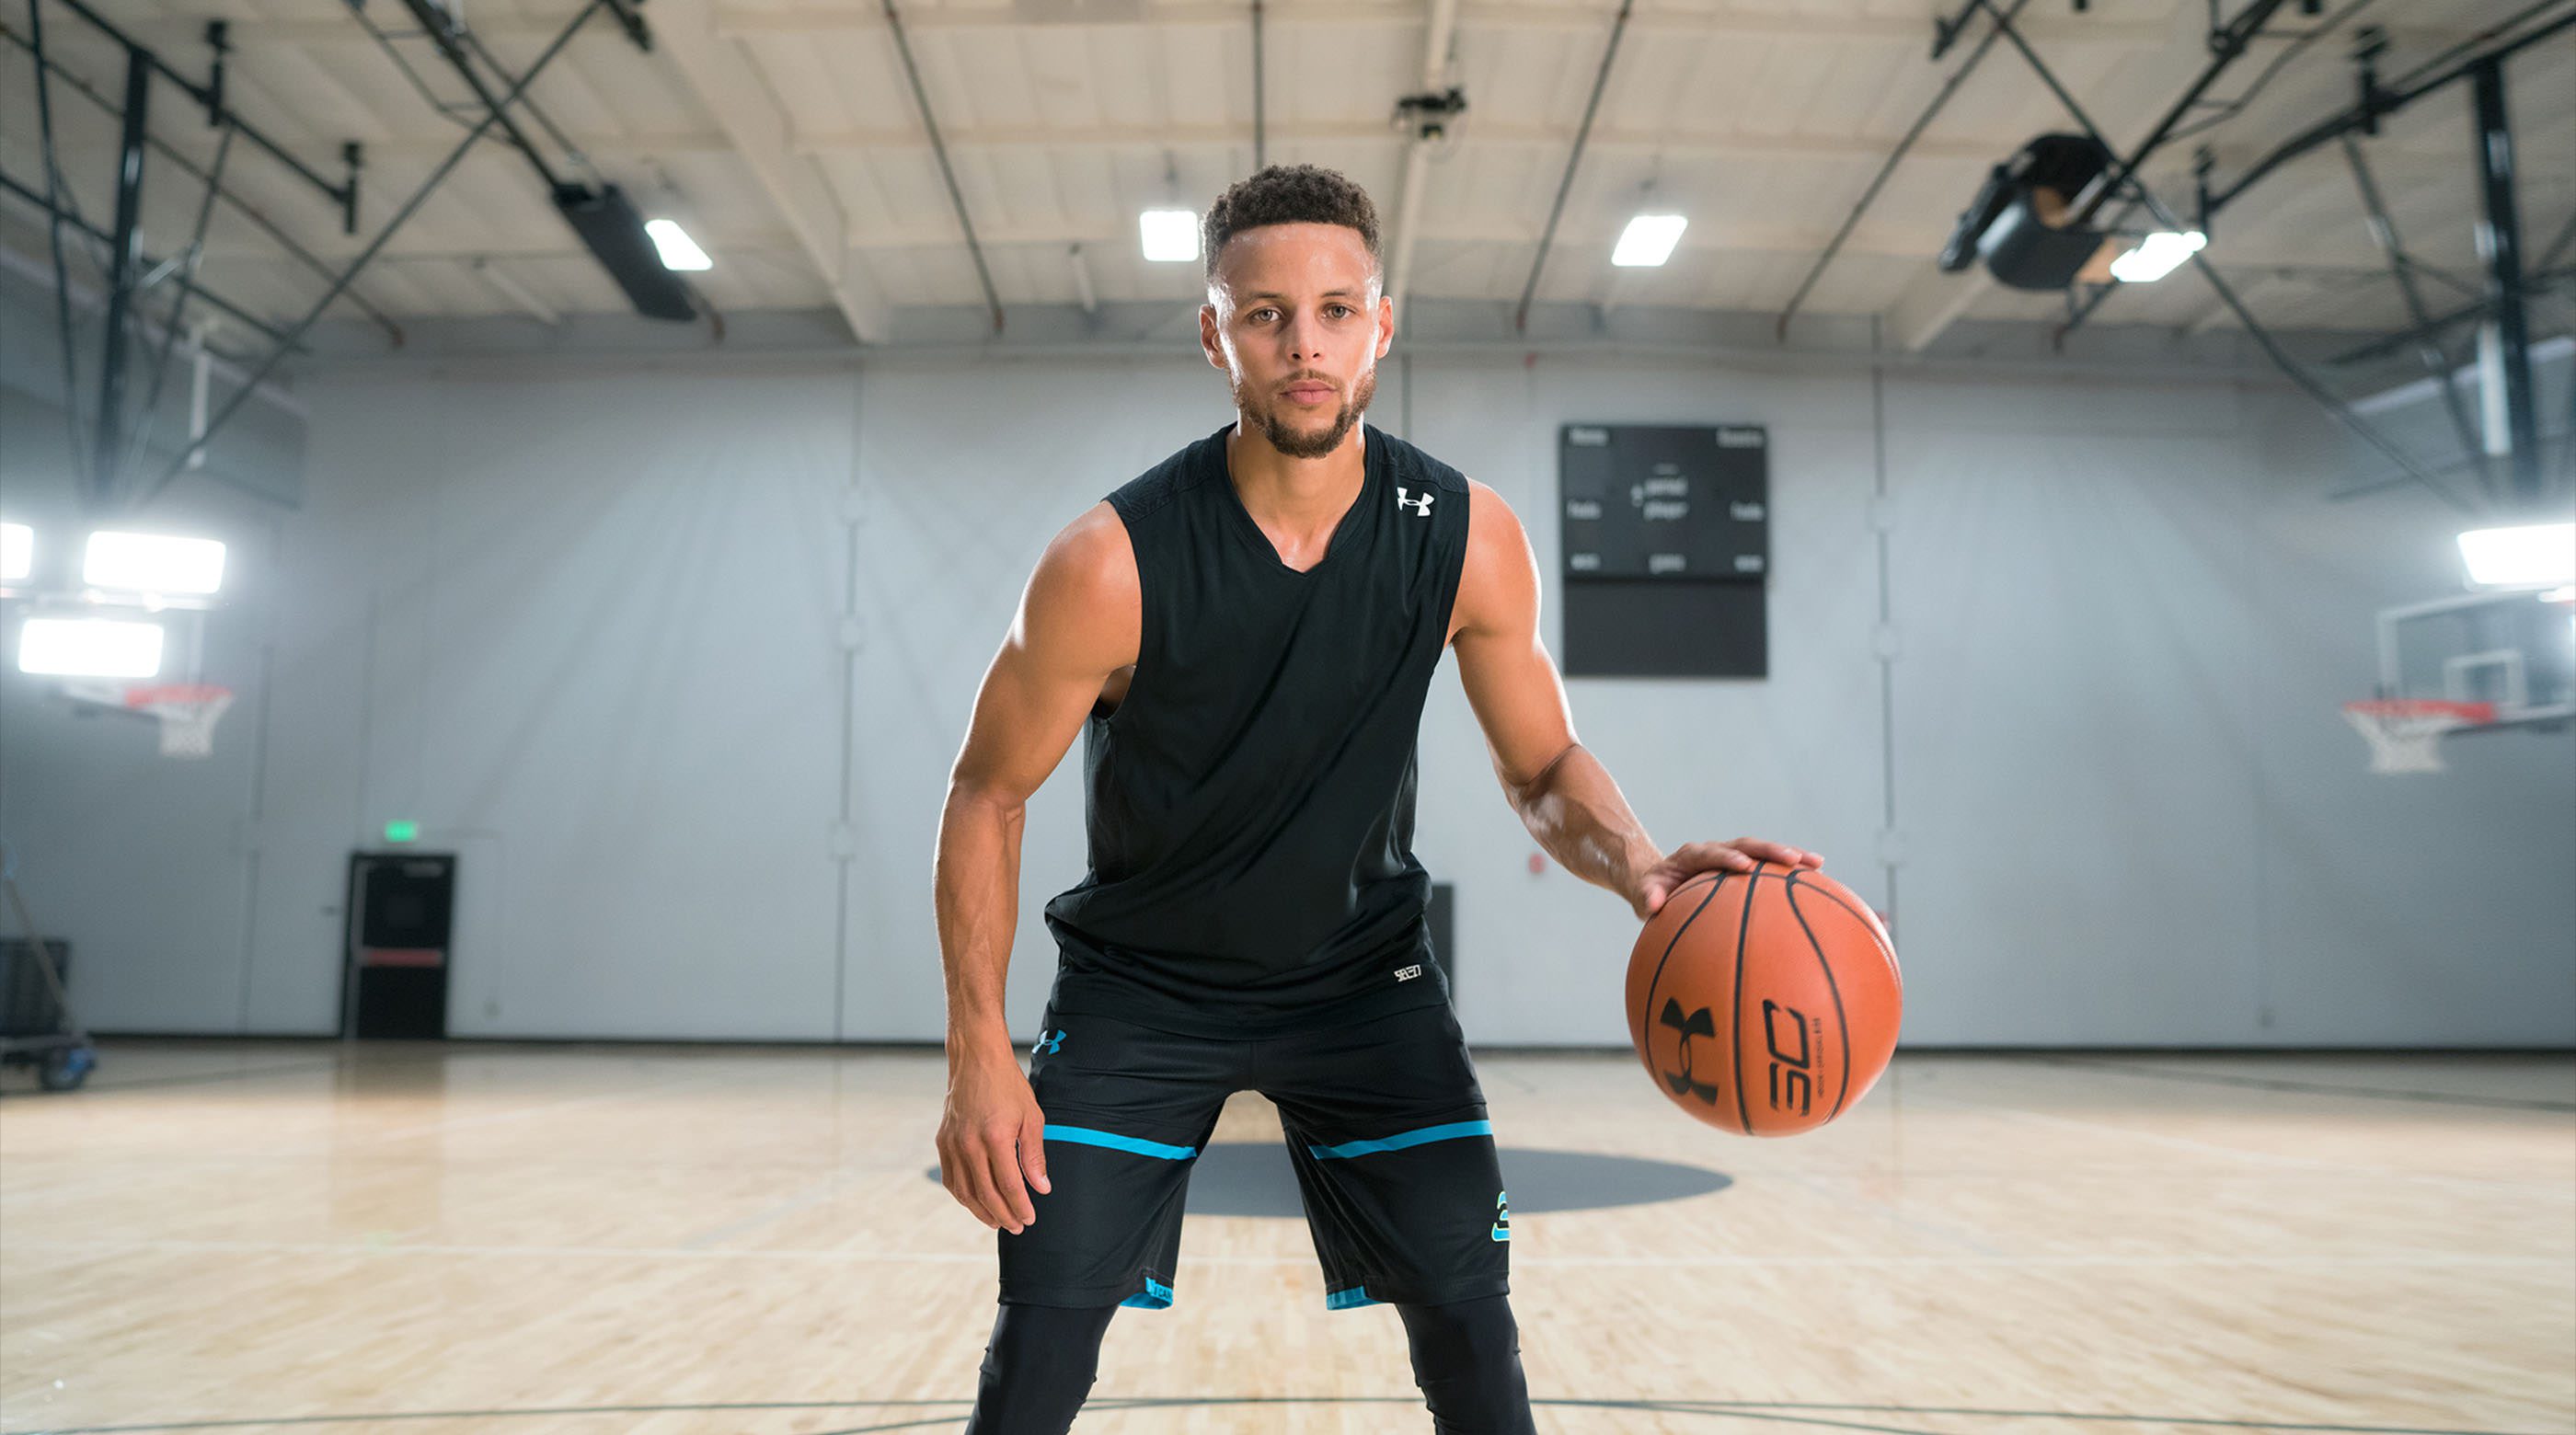 Download [MasterClass] STEPHEN CURRY TEACHES SHOOTING, BALL-HANDLING, AND SCORING Free Online Course Videos Torrent and Google Drive Direct Link | Free Courses Online | [FCO] FreeCoursesOnline.Me